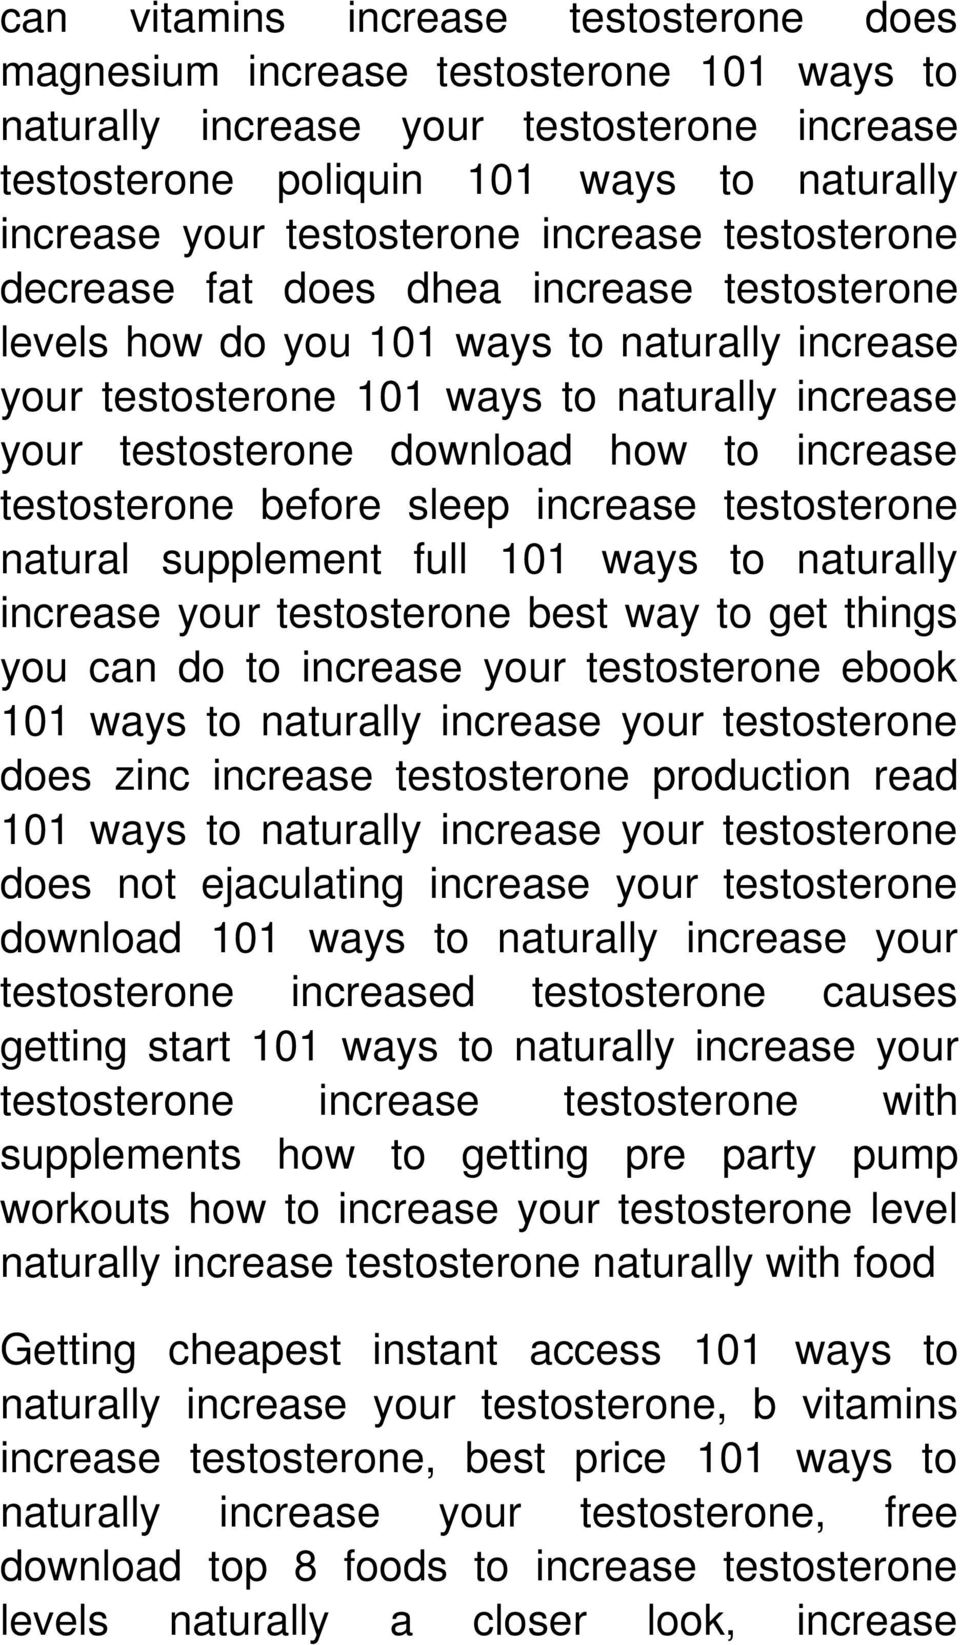 download how to increase testosterone before sleep increase testosterone natural supplement full 101 ways to naturally increase your testosterone best way to get things you can do to increase your